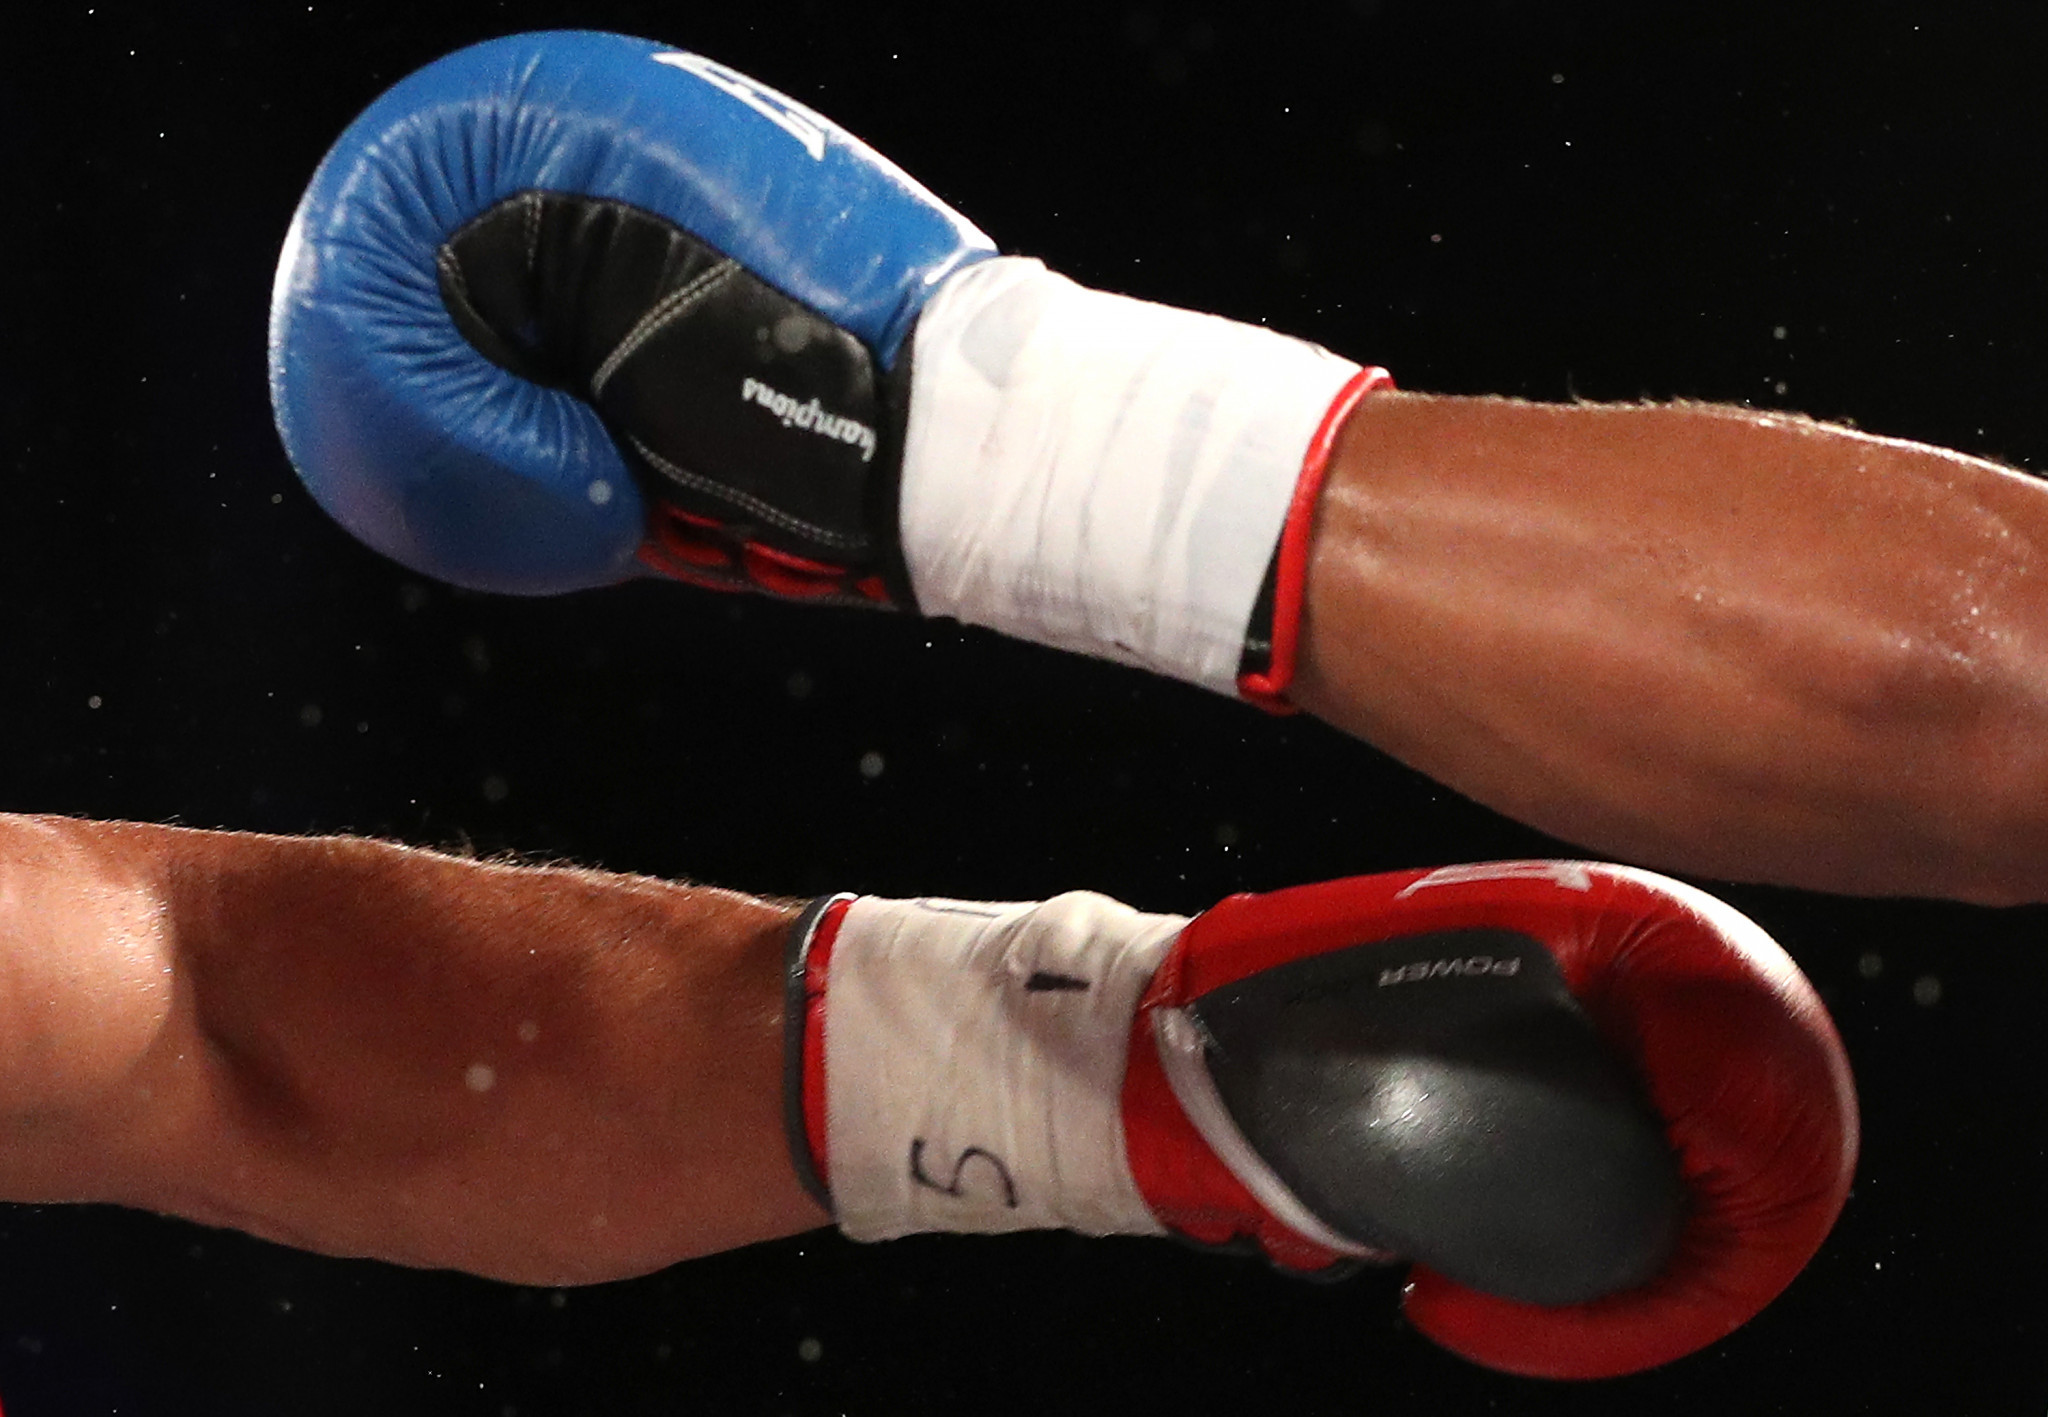 Boxing bouts were alleged to be manipulated at Rio 2016, as detailed in the McLaren report ©Getty Images